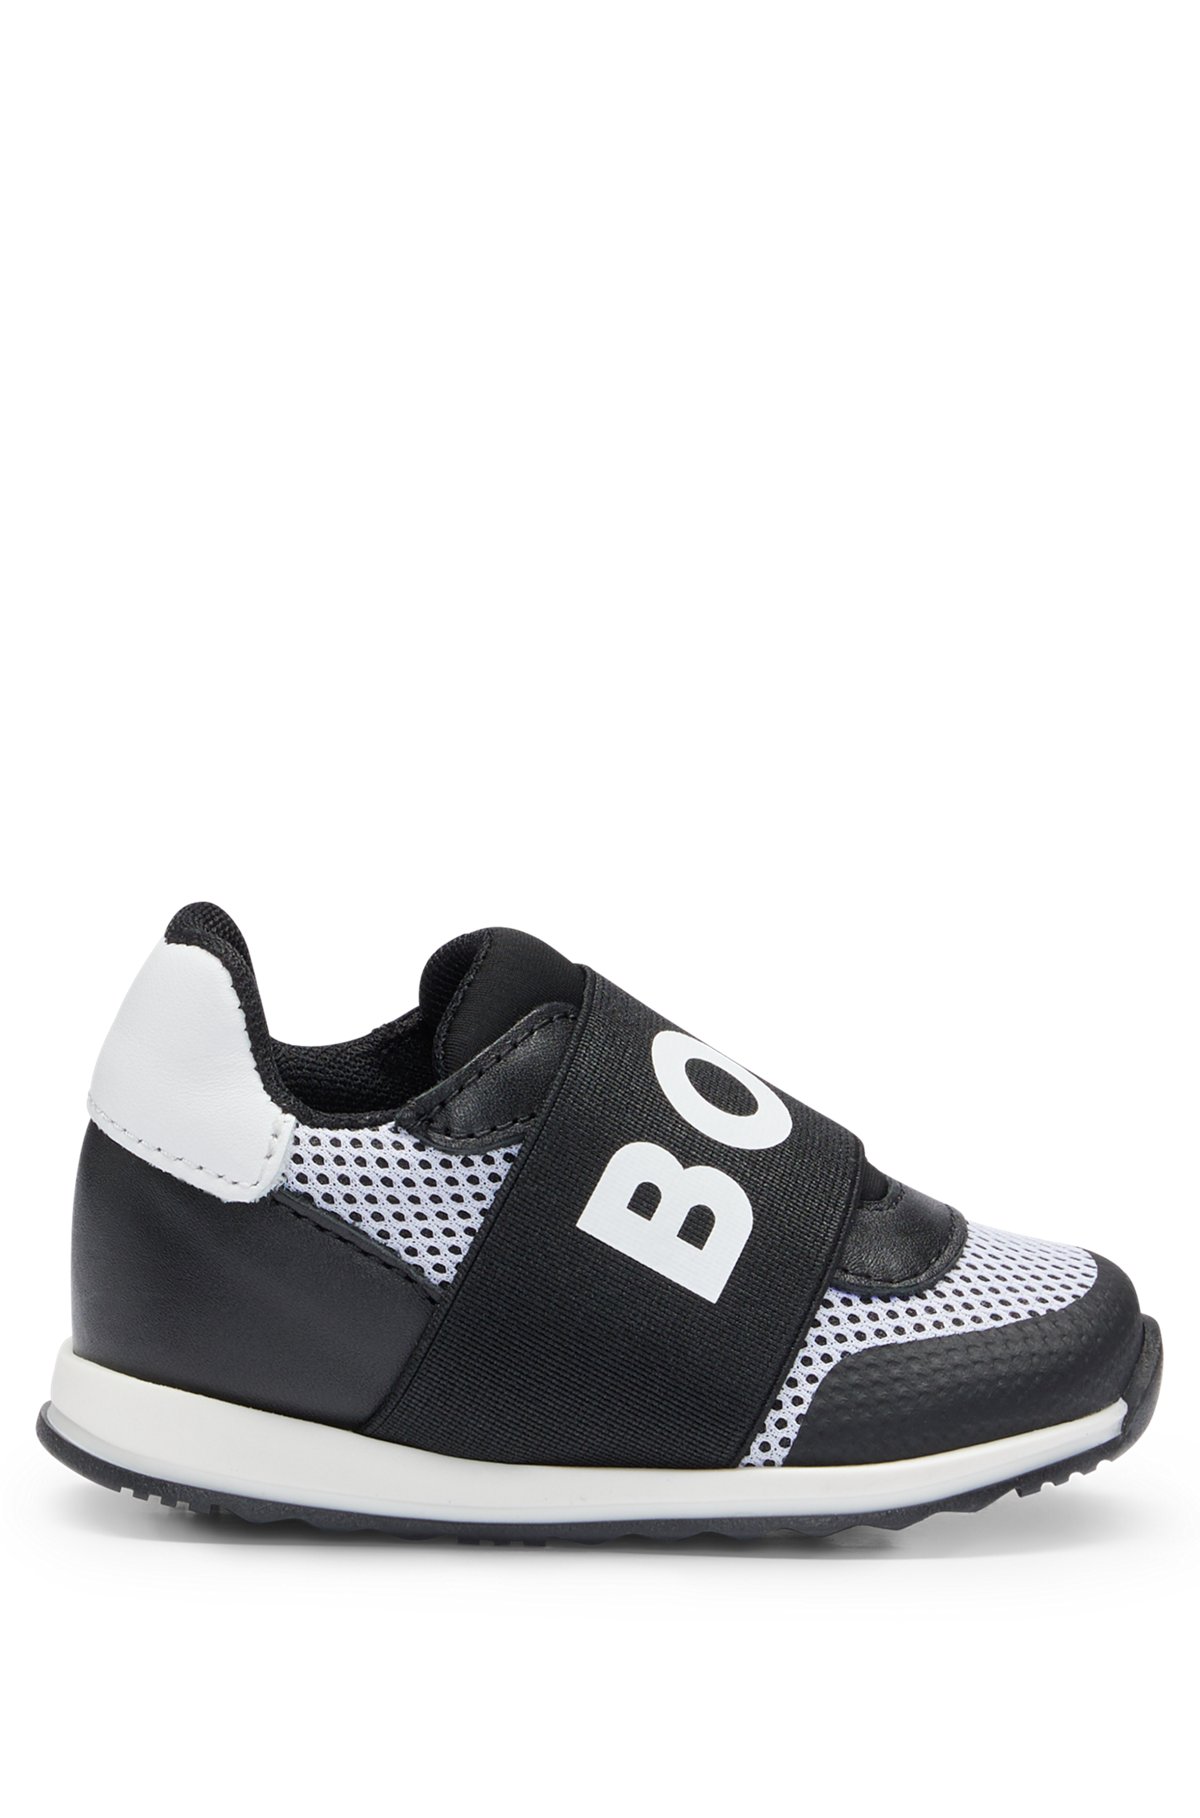 BOSS - Kids' trainers in leather and mesh with logo strap